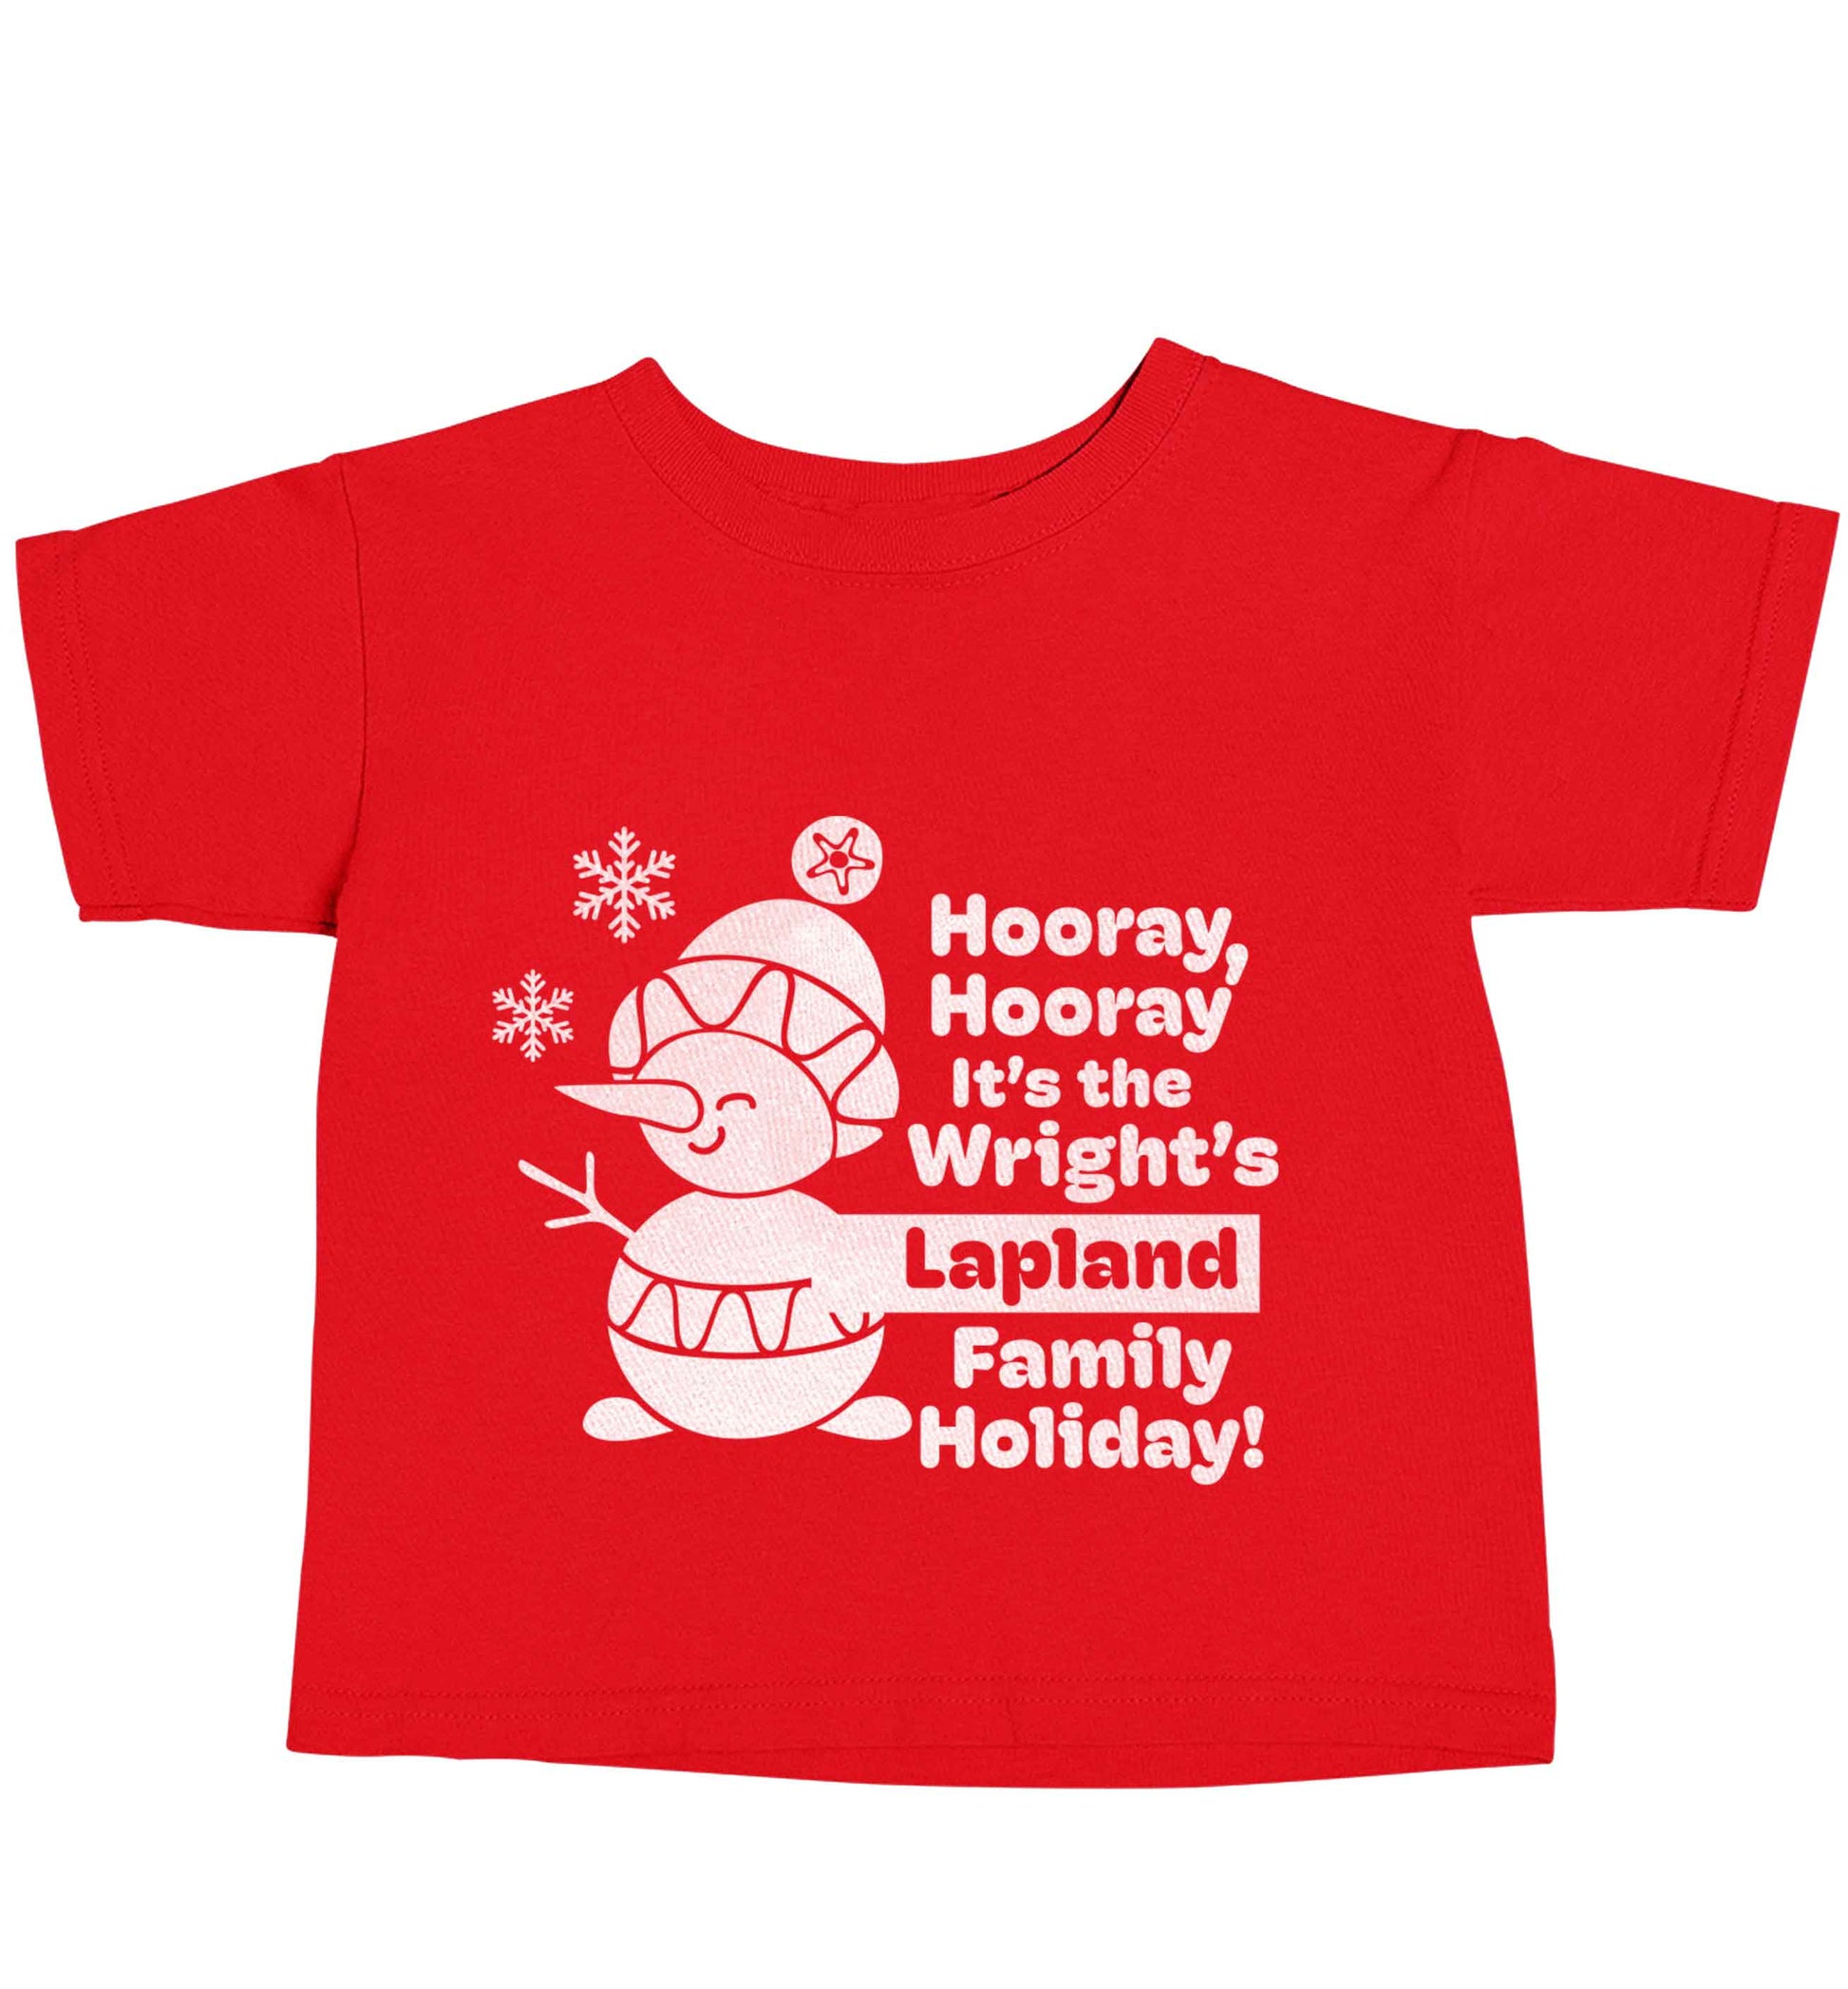 Hooray it's the personalised Lapland holiday! red baby toddler Tshirt 2 Years